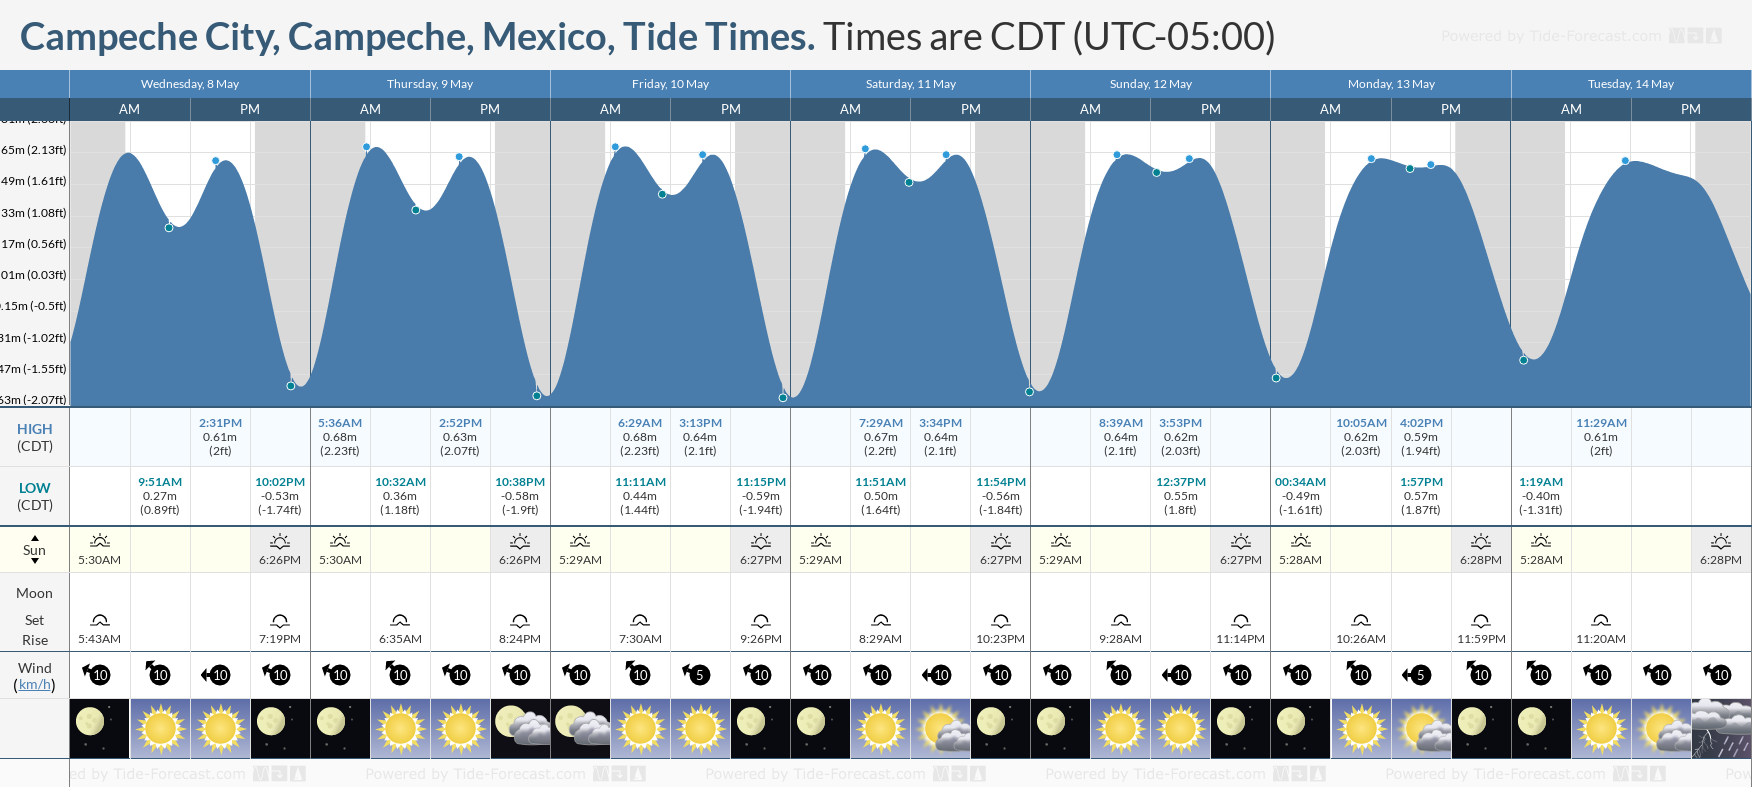 Campeche City, Campeche, Mexico Tide Chart including high and low tide tide times for the next 7 days